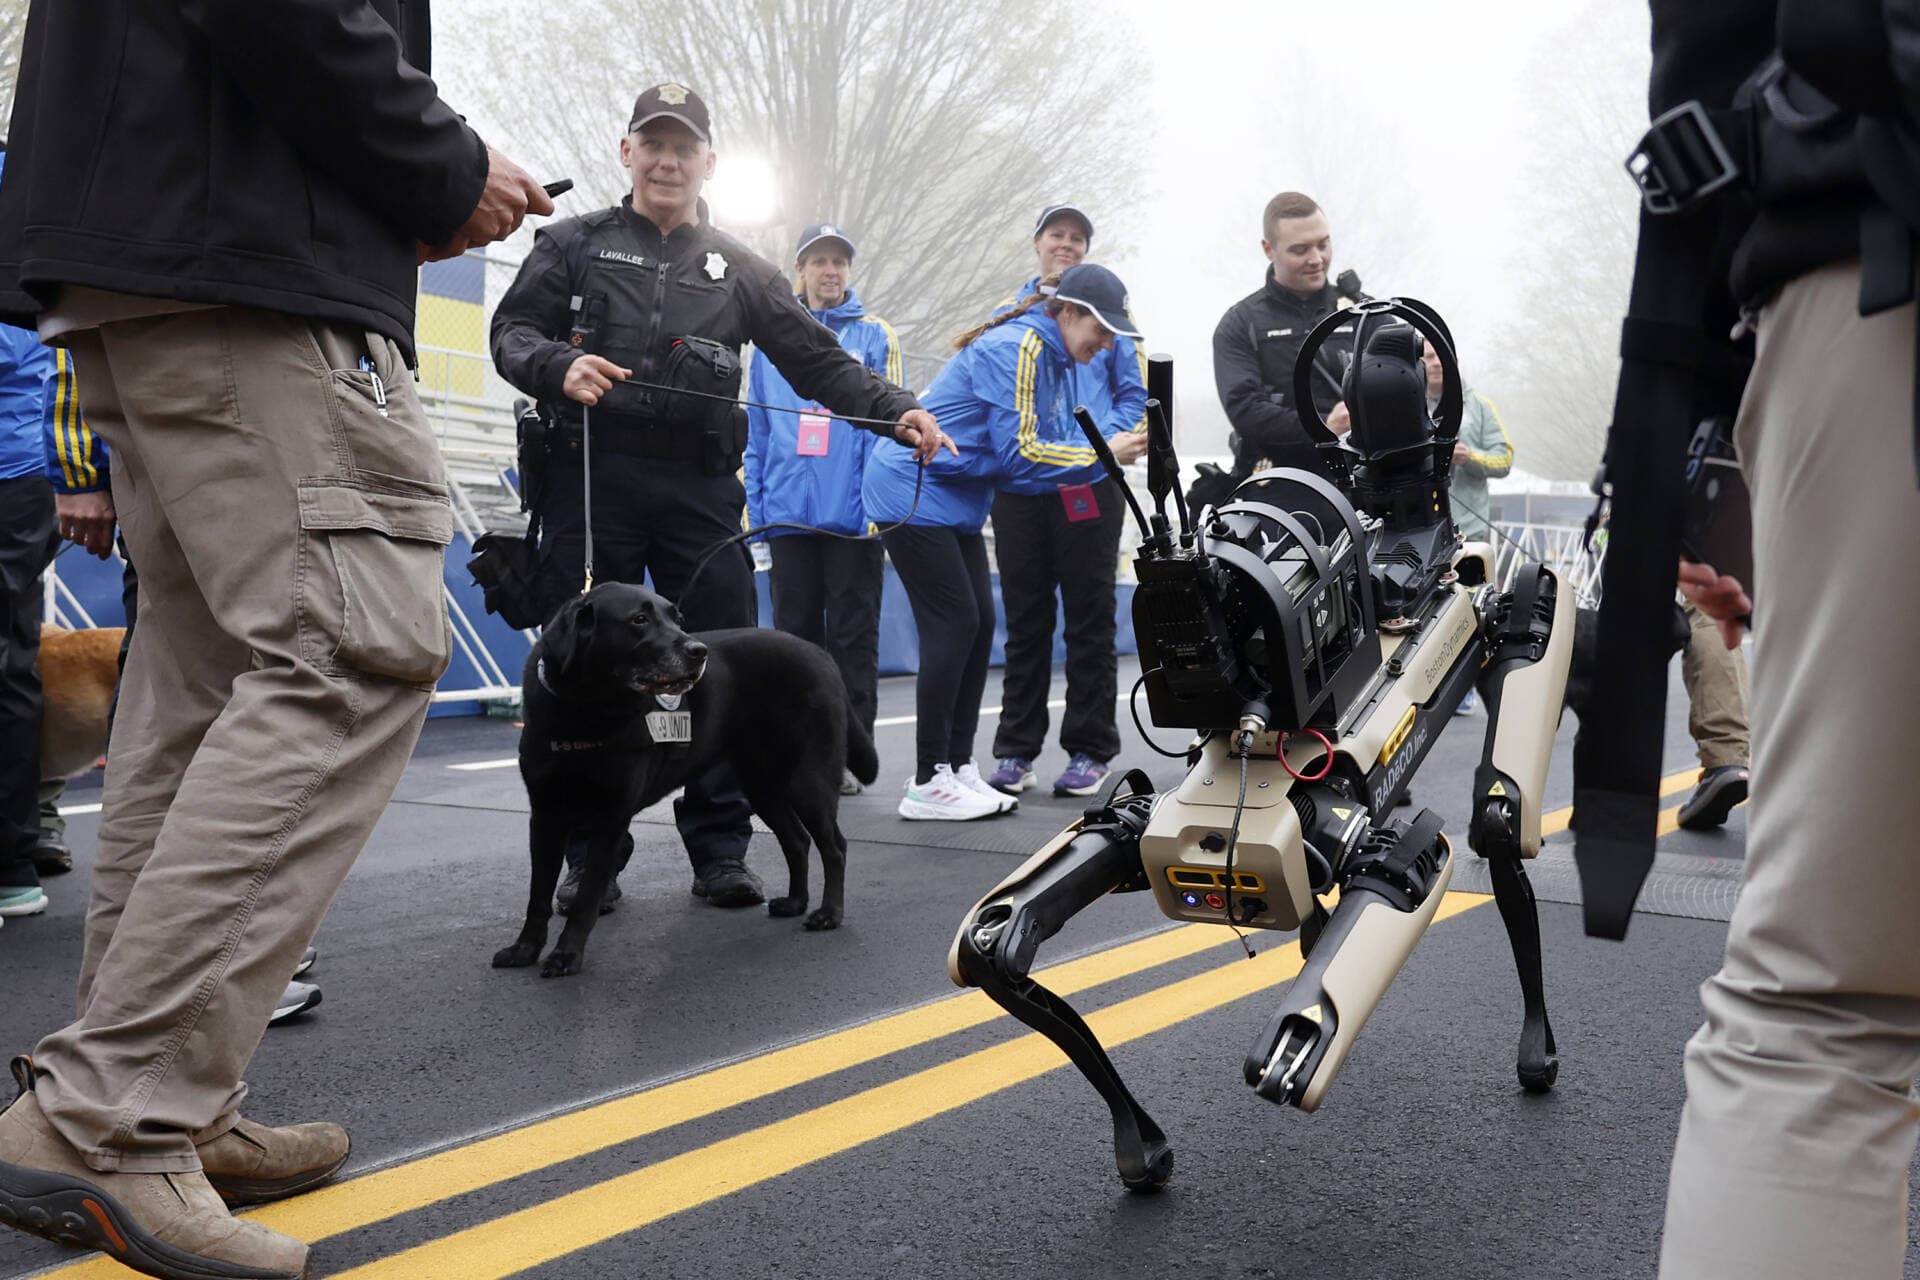 A K-9 dog looks on as a robotic dog patrols the starting line before the start of the 127th Boston Marathon in Hopkinton, Mass. (Mary Schwalm/AP)